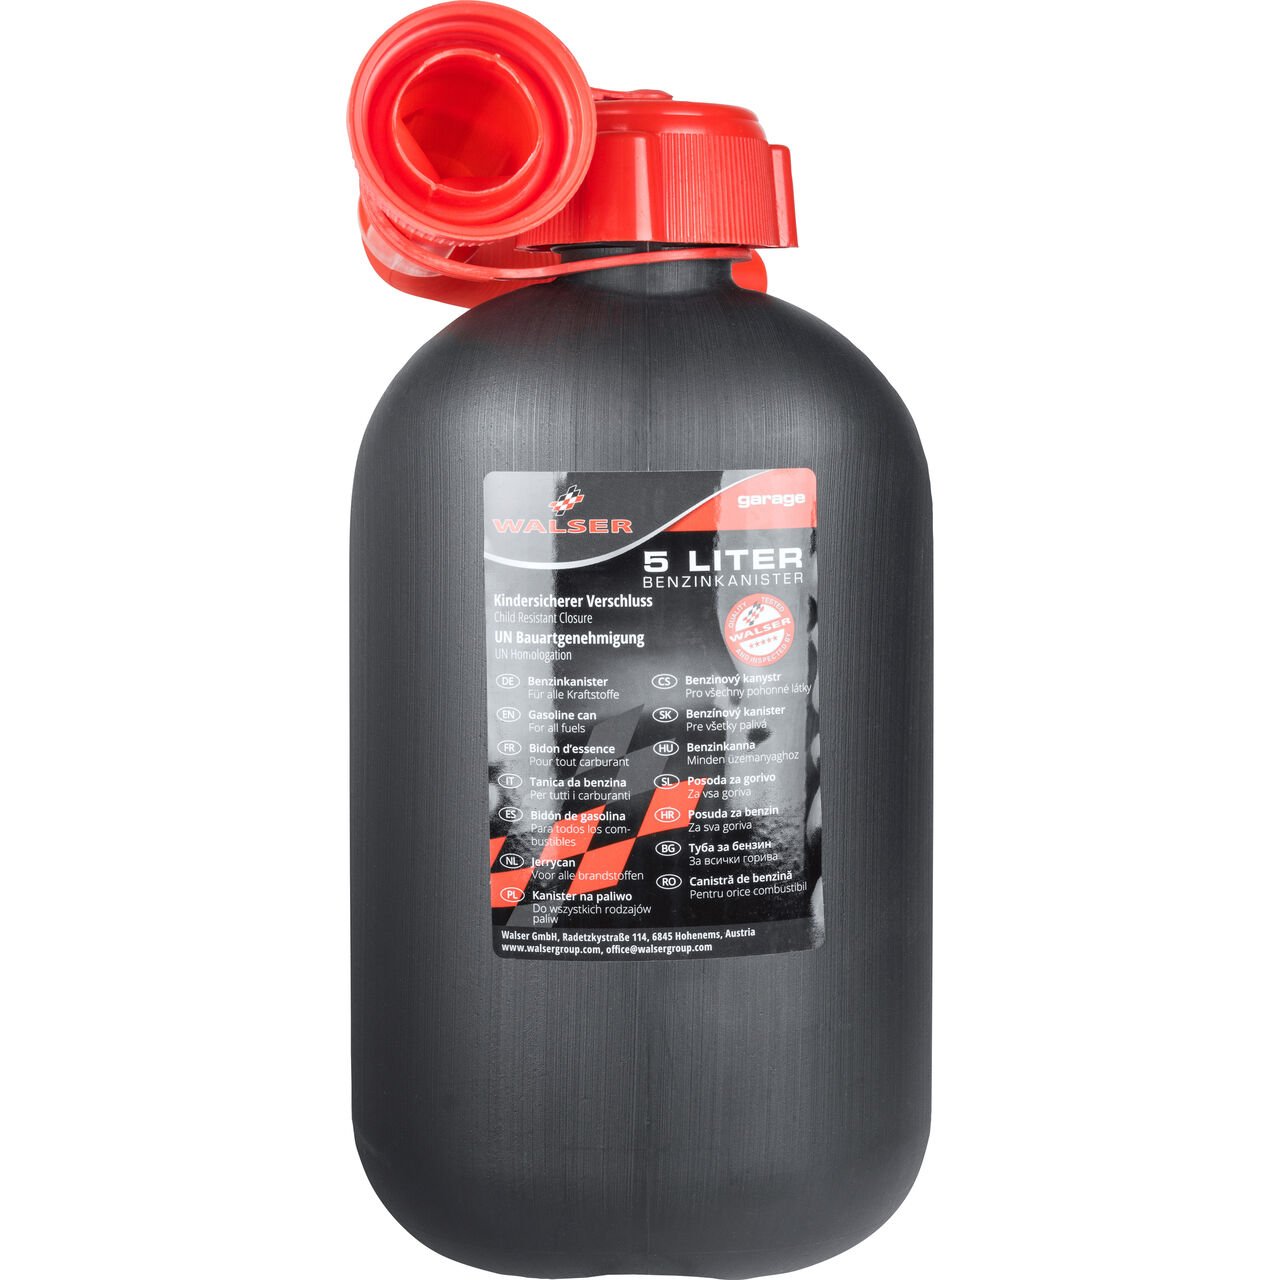 Petrol canister 5 liters with safety closure, 3H1